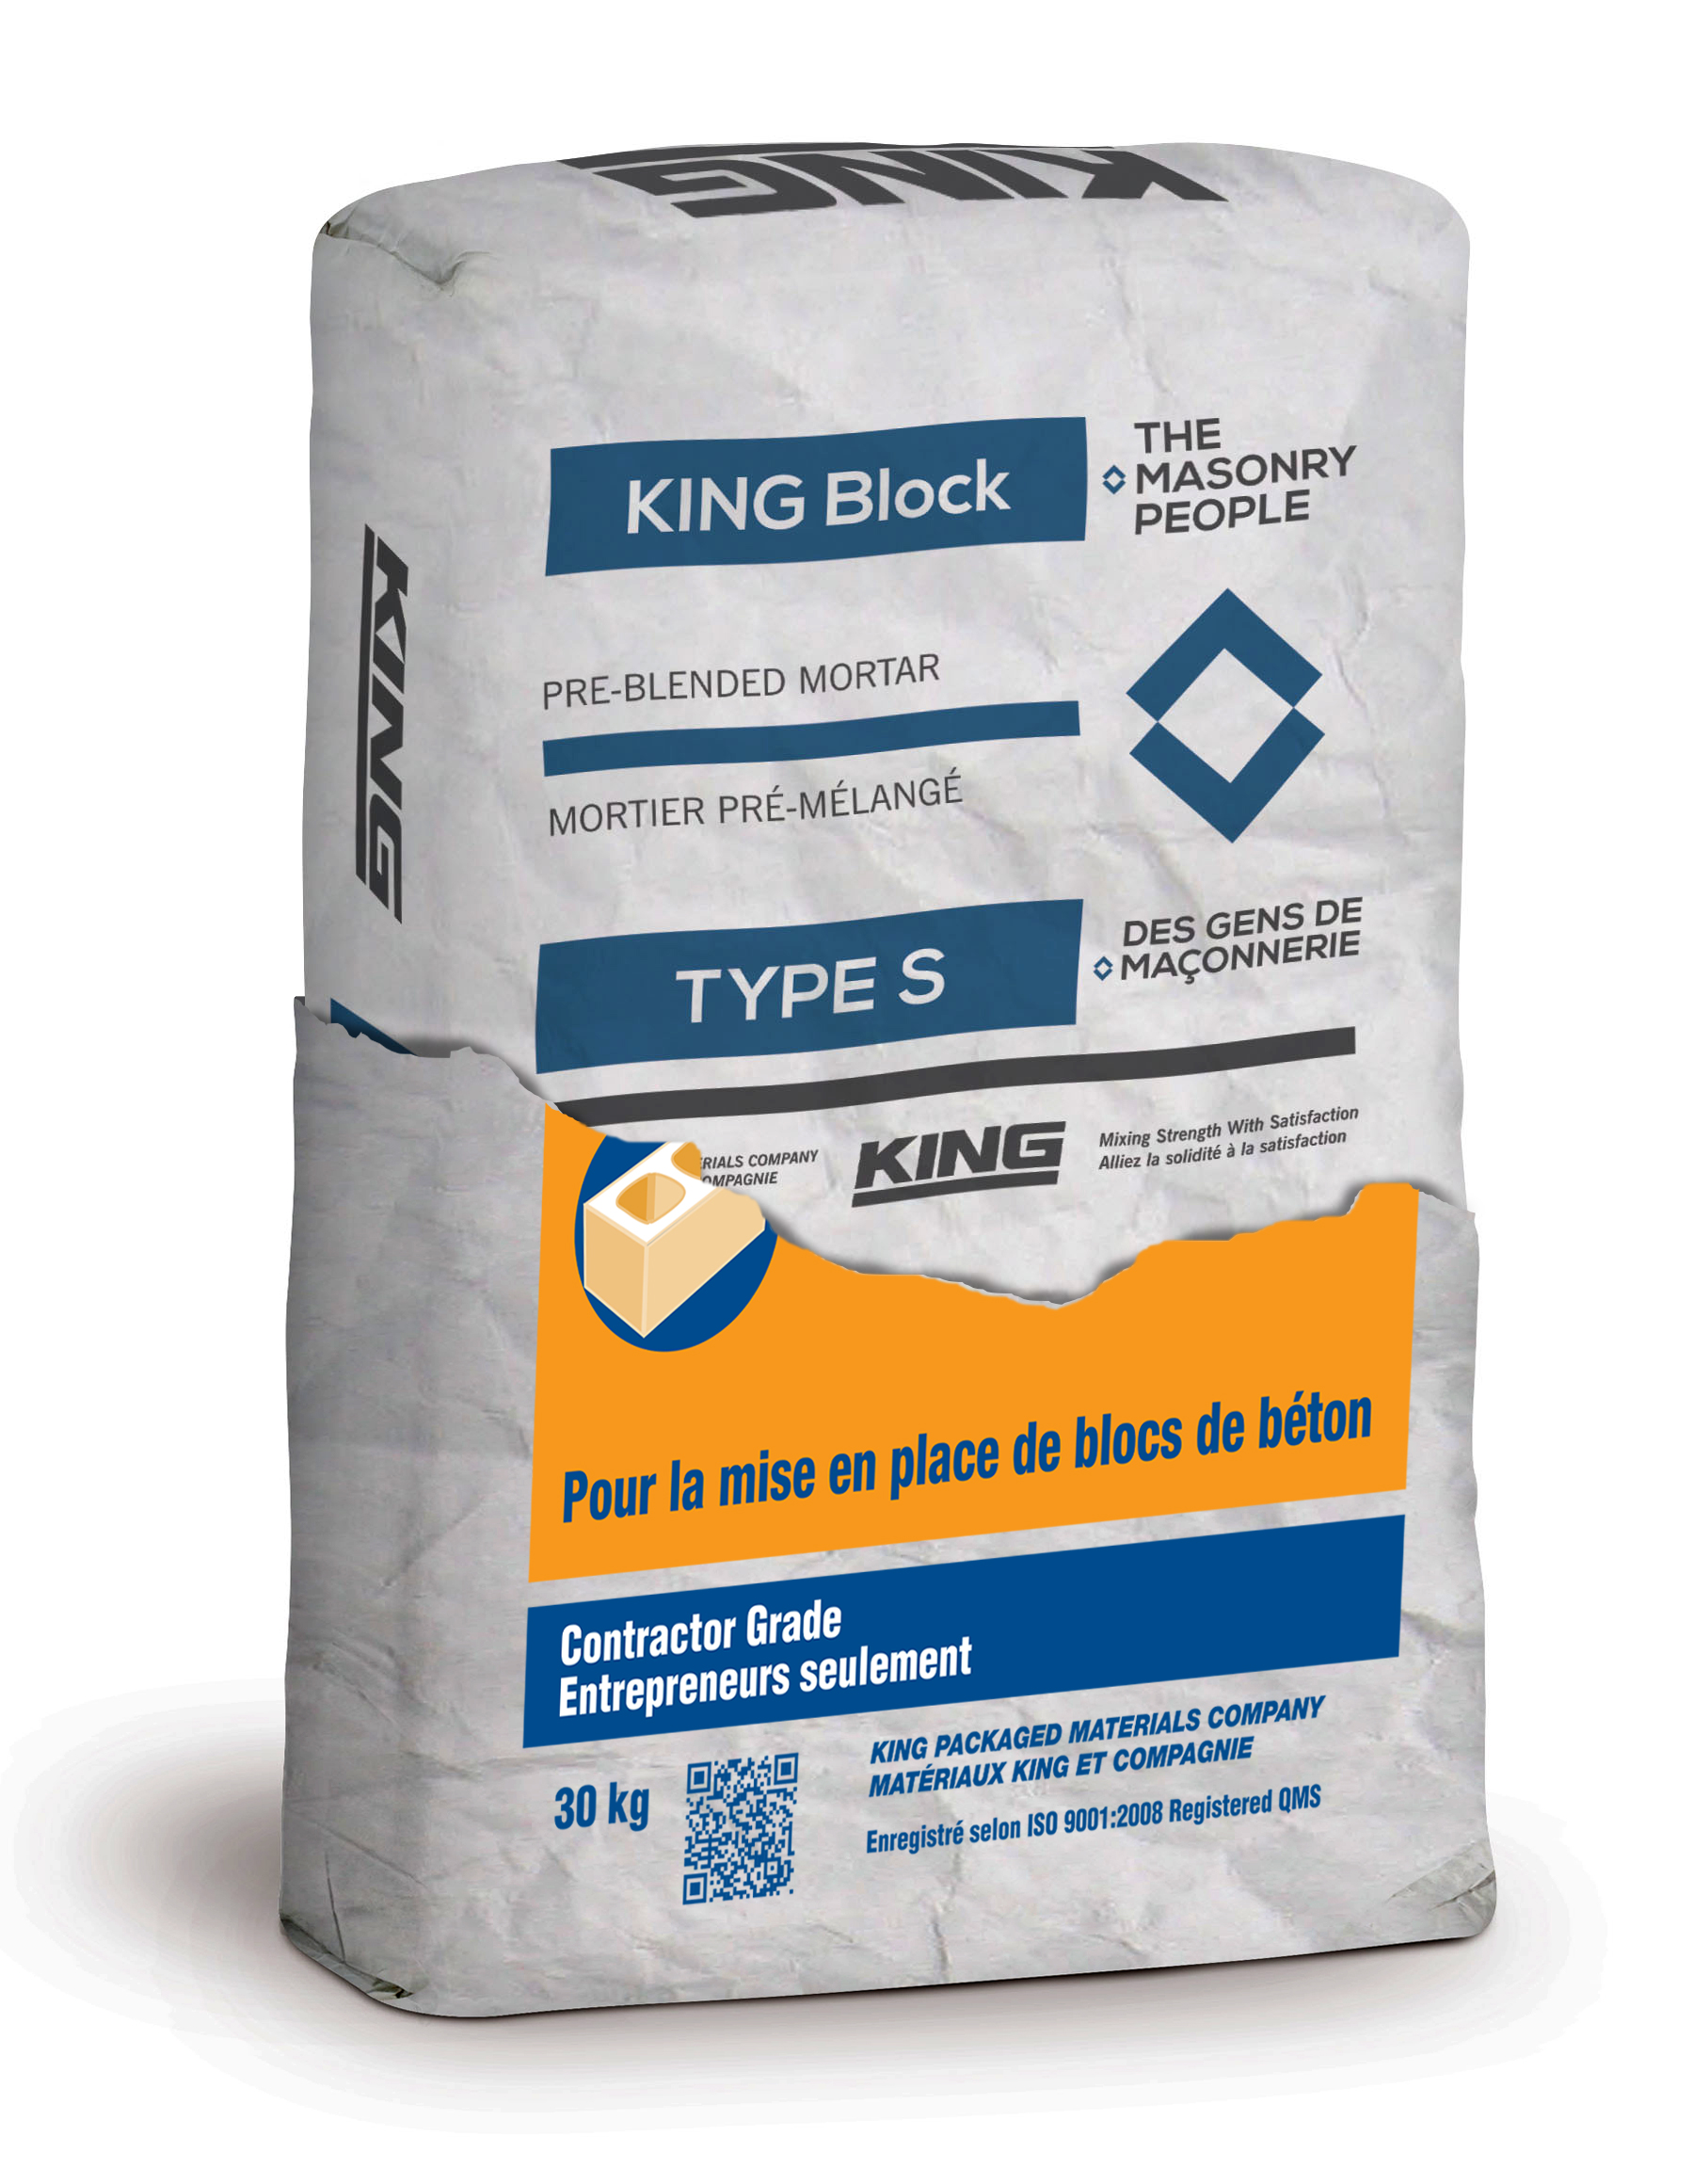 New Packaging Design for Select King Masonry Products